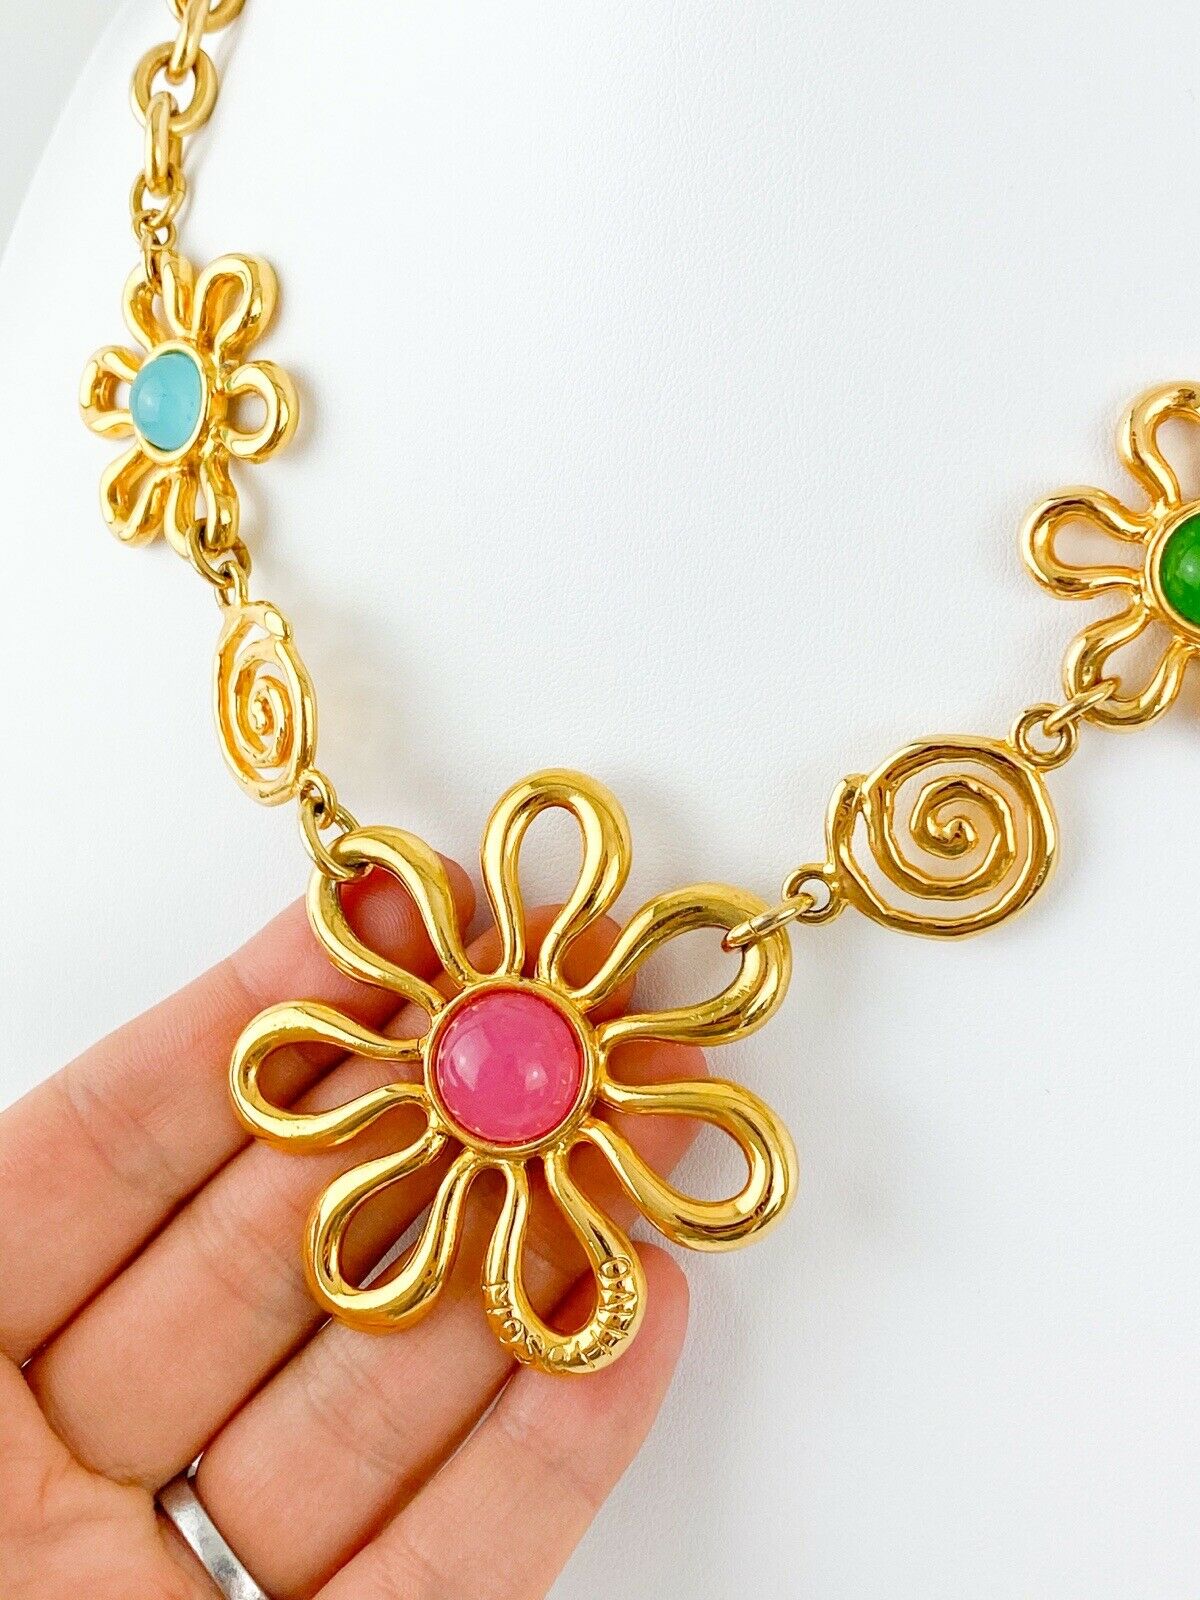 【SOLD OUT】Moschino Bijoux Vintage Gold Tone Necklace Openwork Flower Cabochon